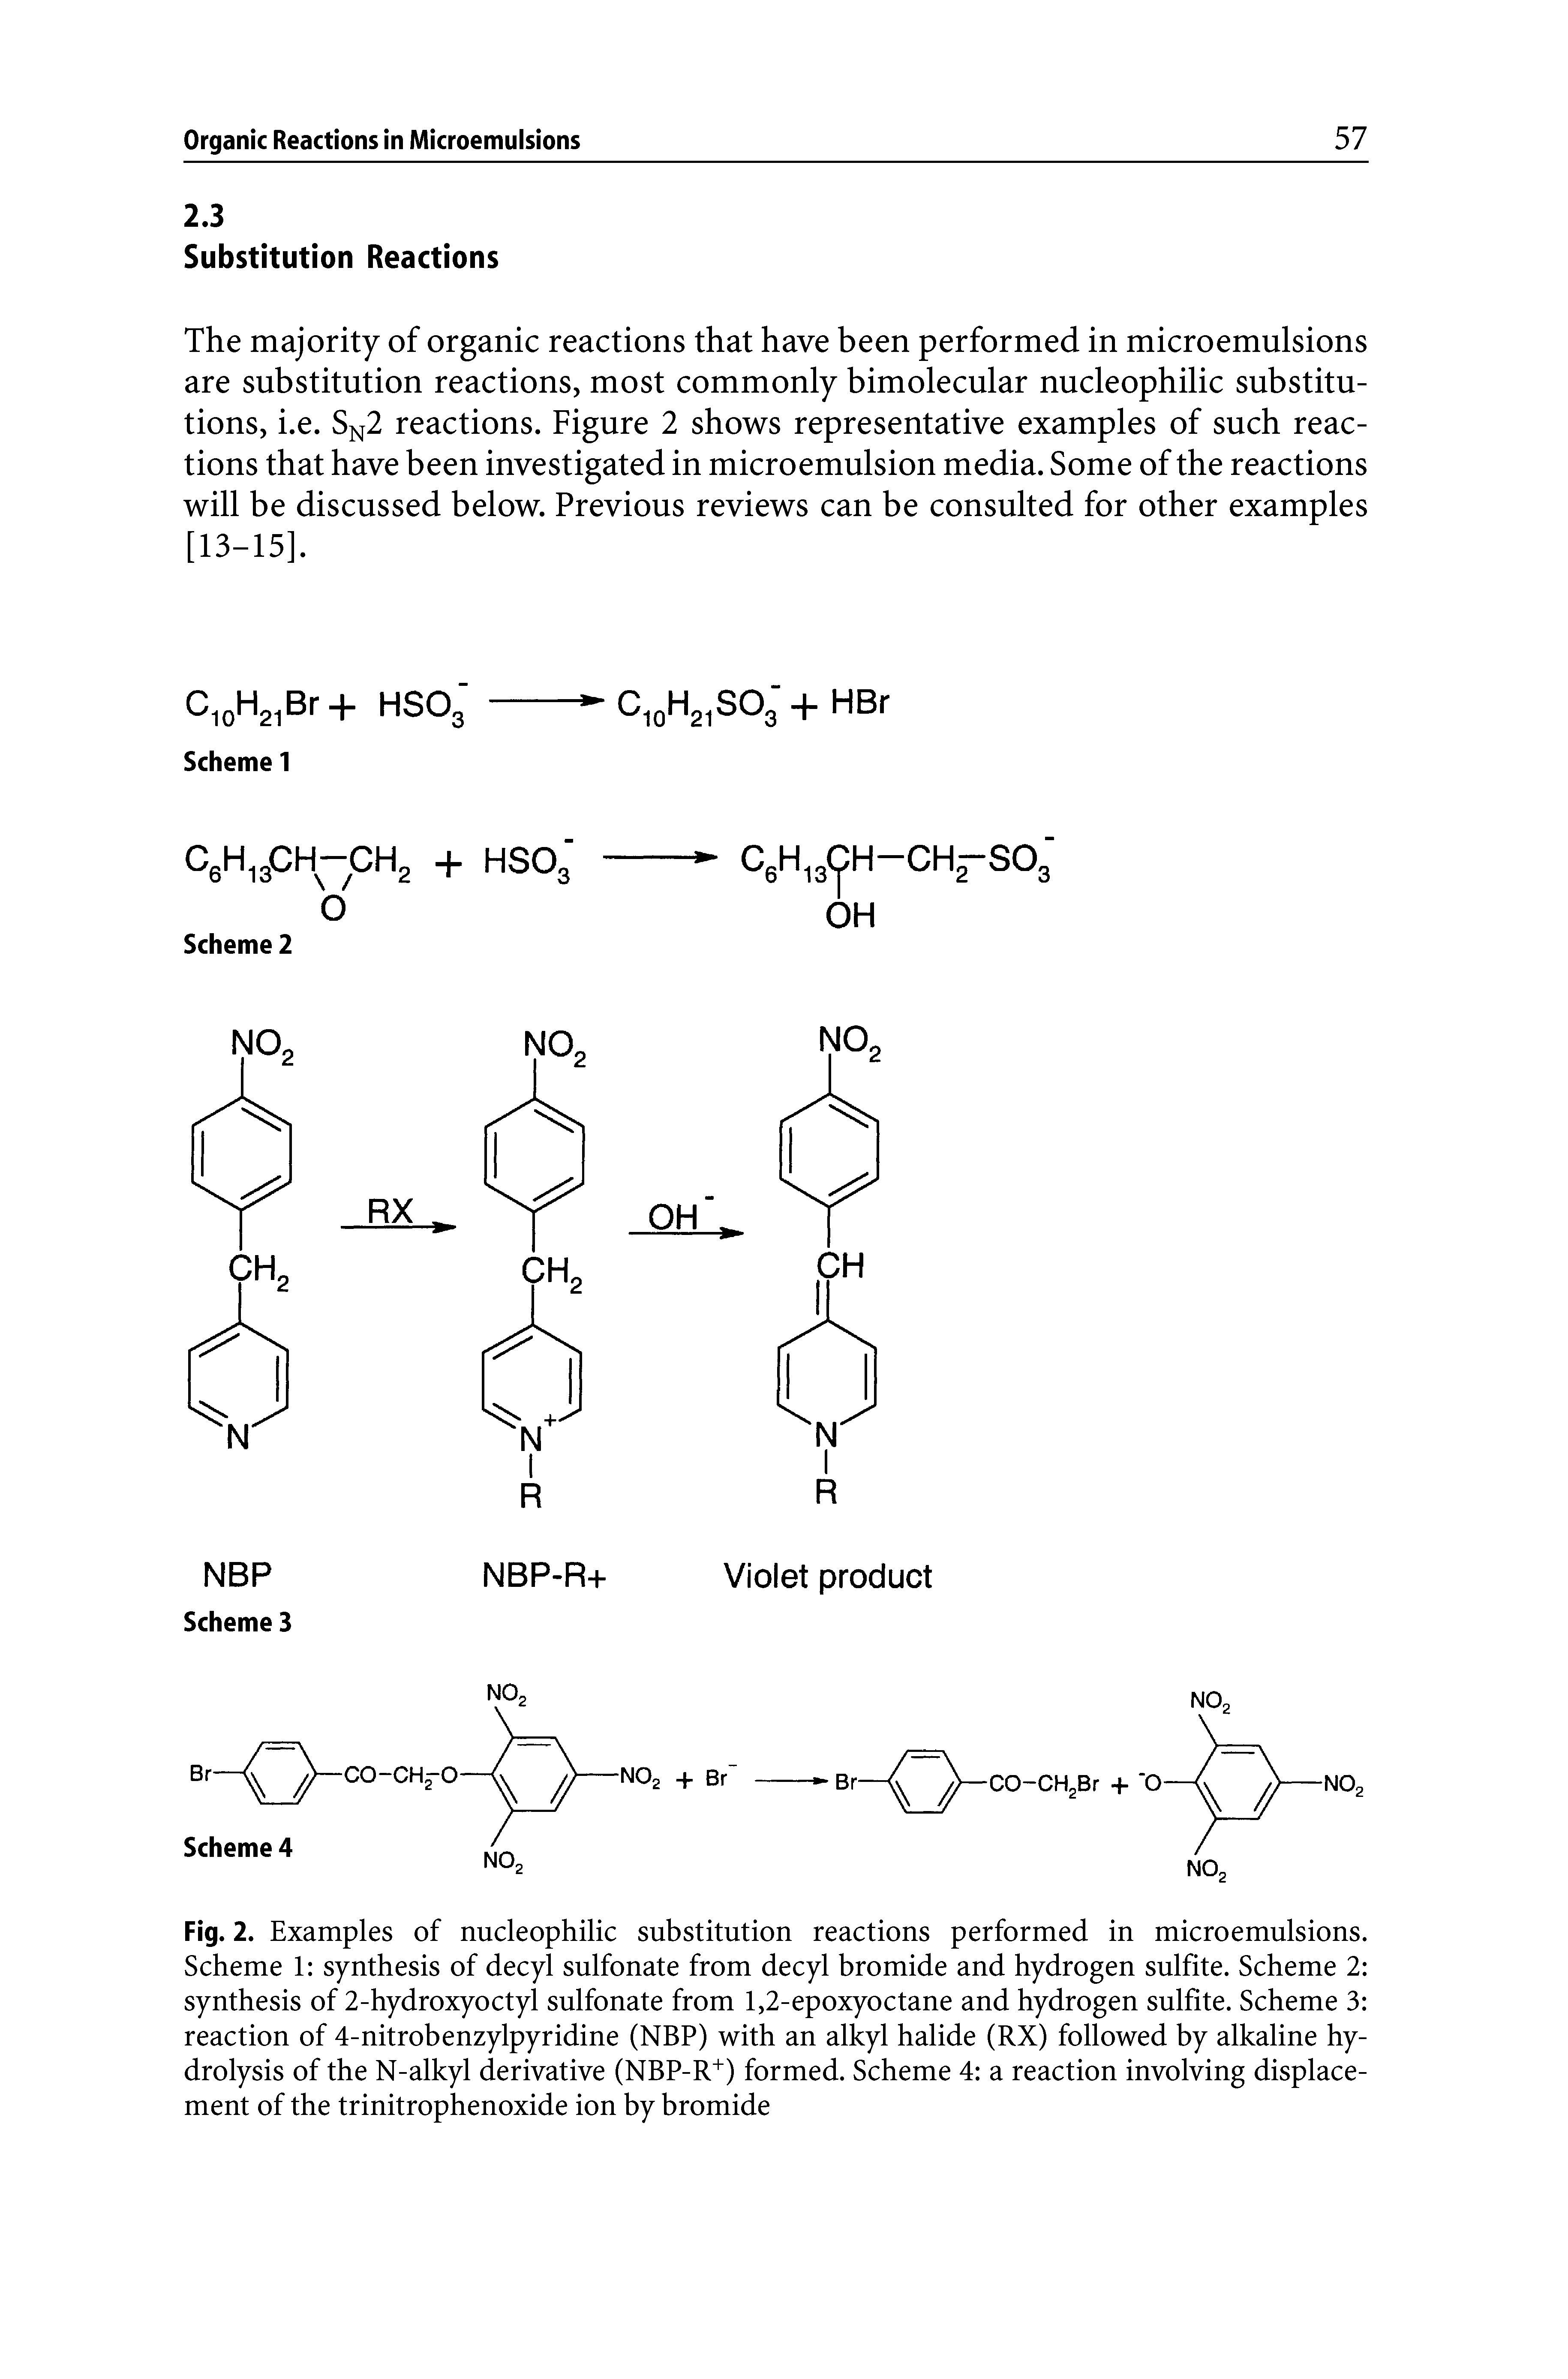 Fig. 2. Examples of nucleophilic substitution reactions performed in microemulsions. Scheme 1 synthesis of decyl sulfonate from decyl bromide and hydrogen sulfite. Scheme 2 synthesis of 2-hydroxyoctyl sulfonate from 1,2-epoxyoctane and hydrogen sulfite. Scheme 3 reaction of 4-nitrobenzylpyridine (NBP) with an alkyl halide (RX) followed by alkaline hydrolysis of the N-alkyl derivative (NBP-R+) formed. Scheme 4 a reaction involving displacement of the trinitrophenoxide ion by bromide...